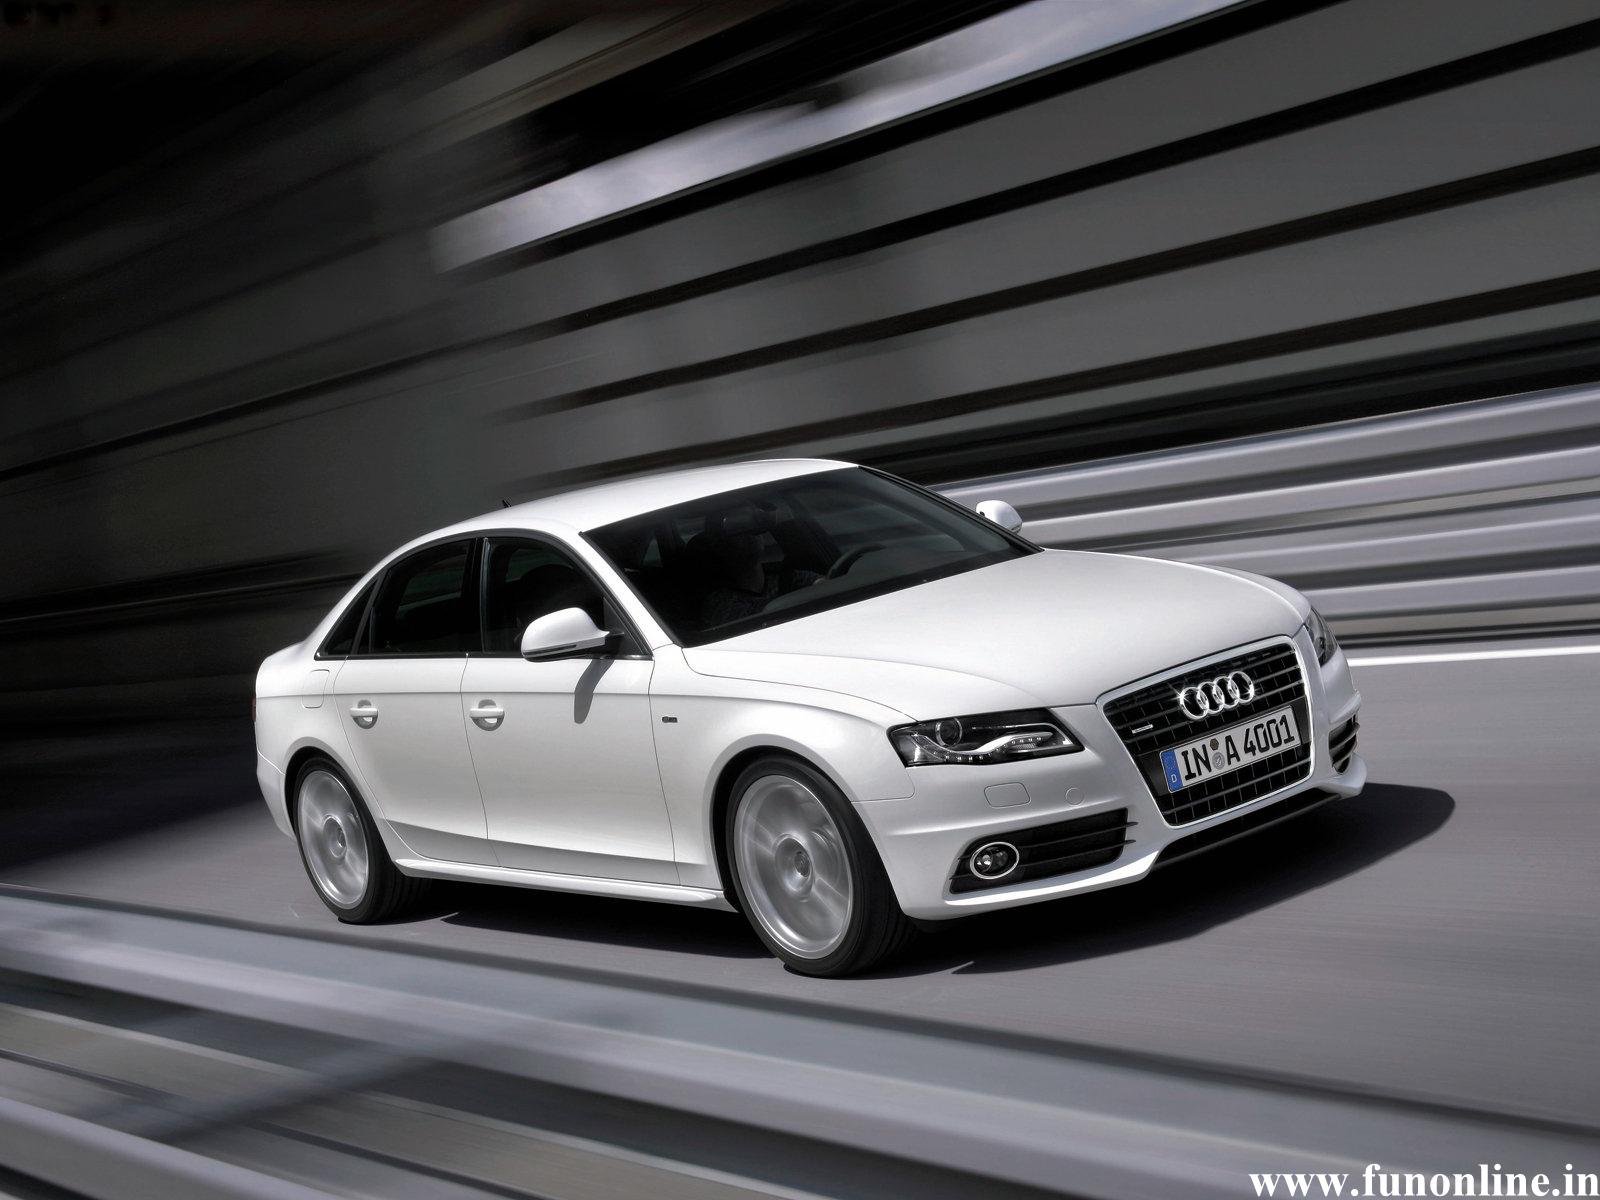 Audi A4 Wallpapers Best Executive Car Audi A4 HD Wallpapers For Free